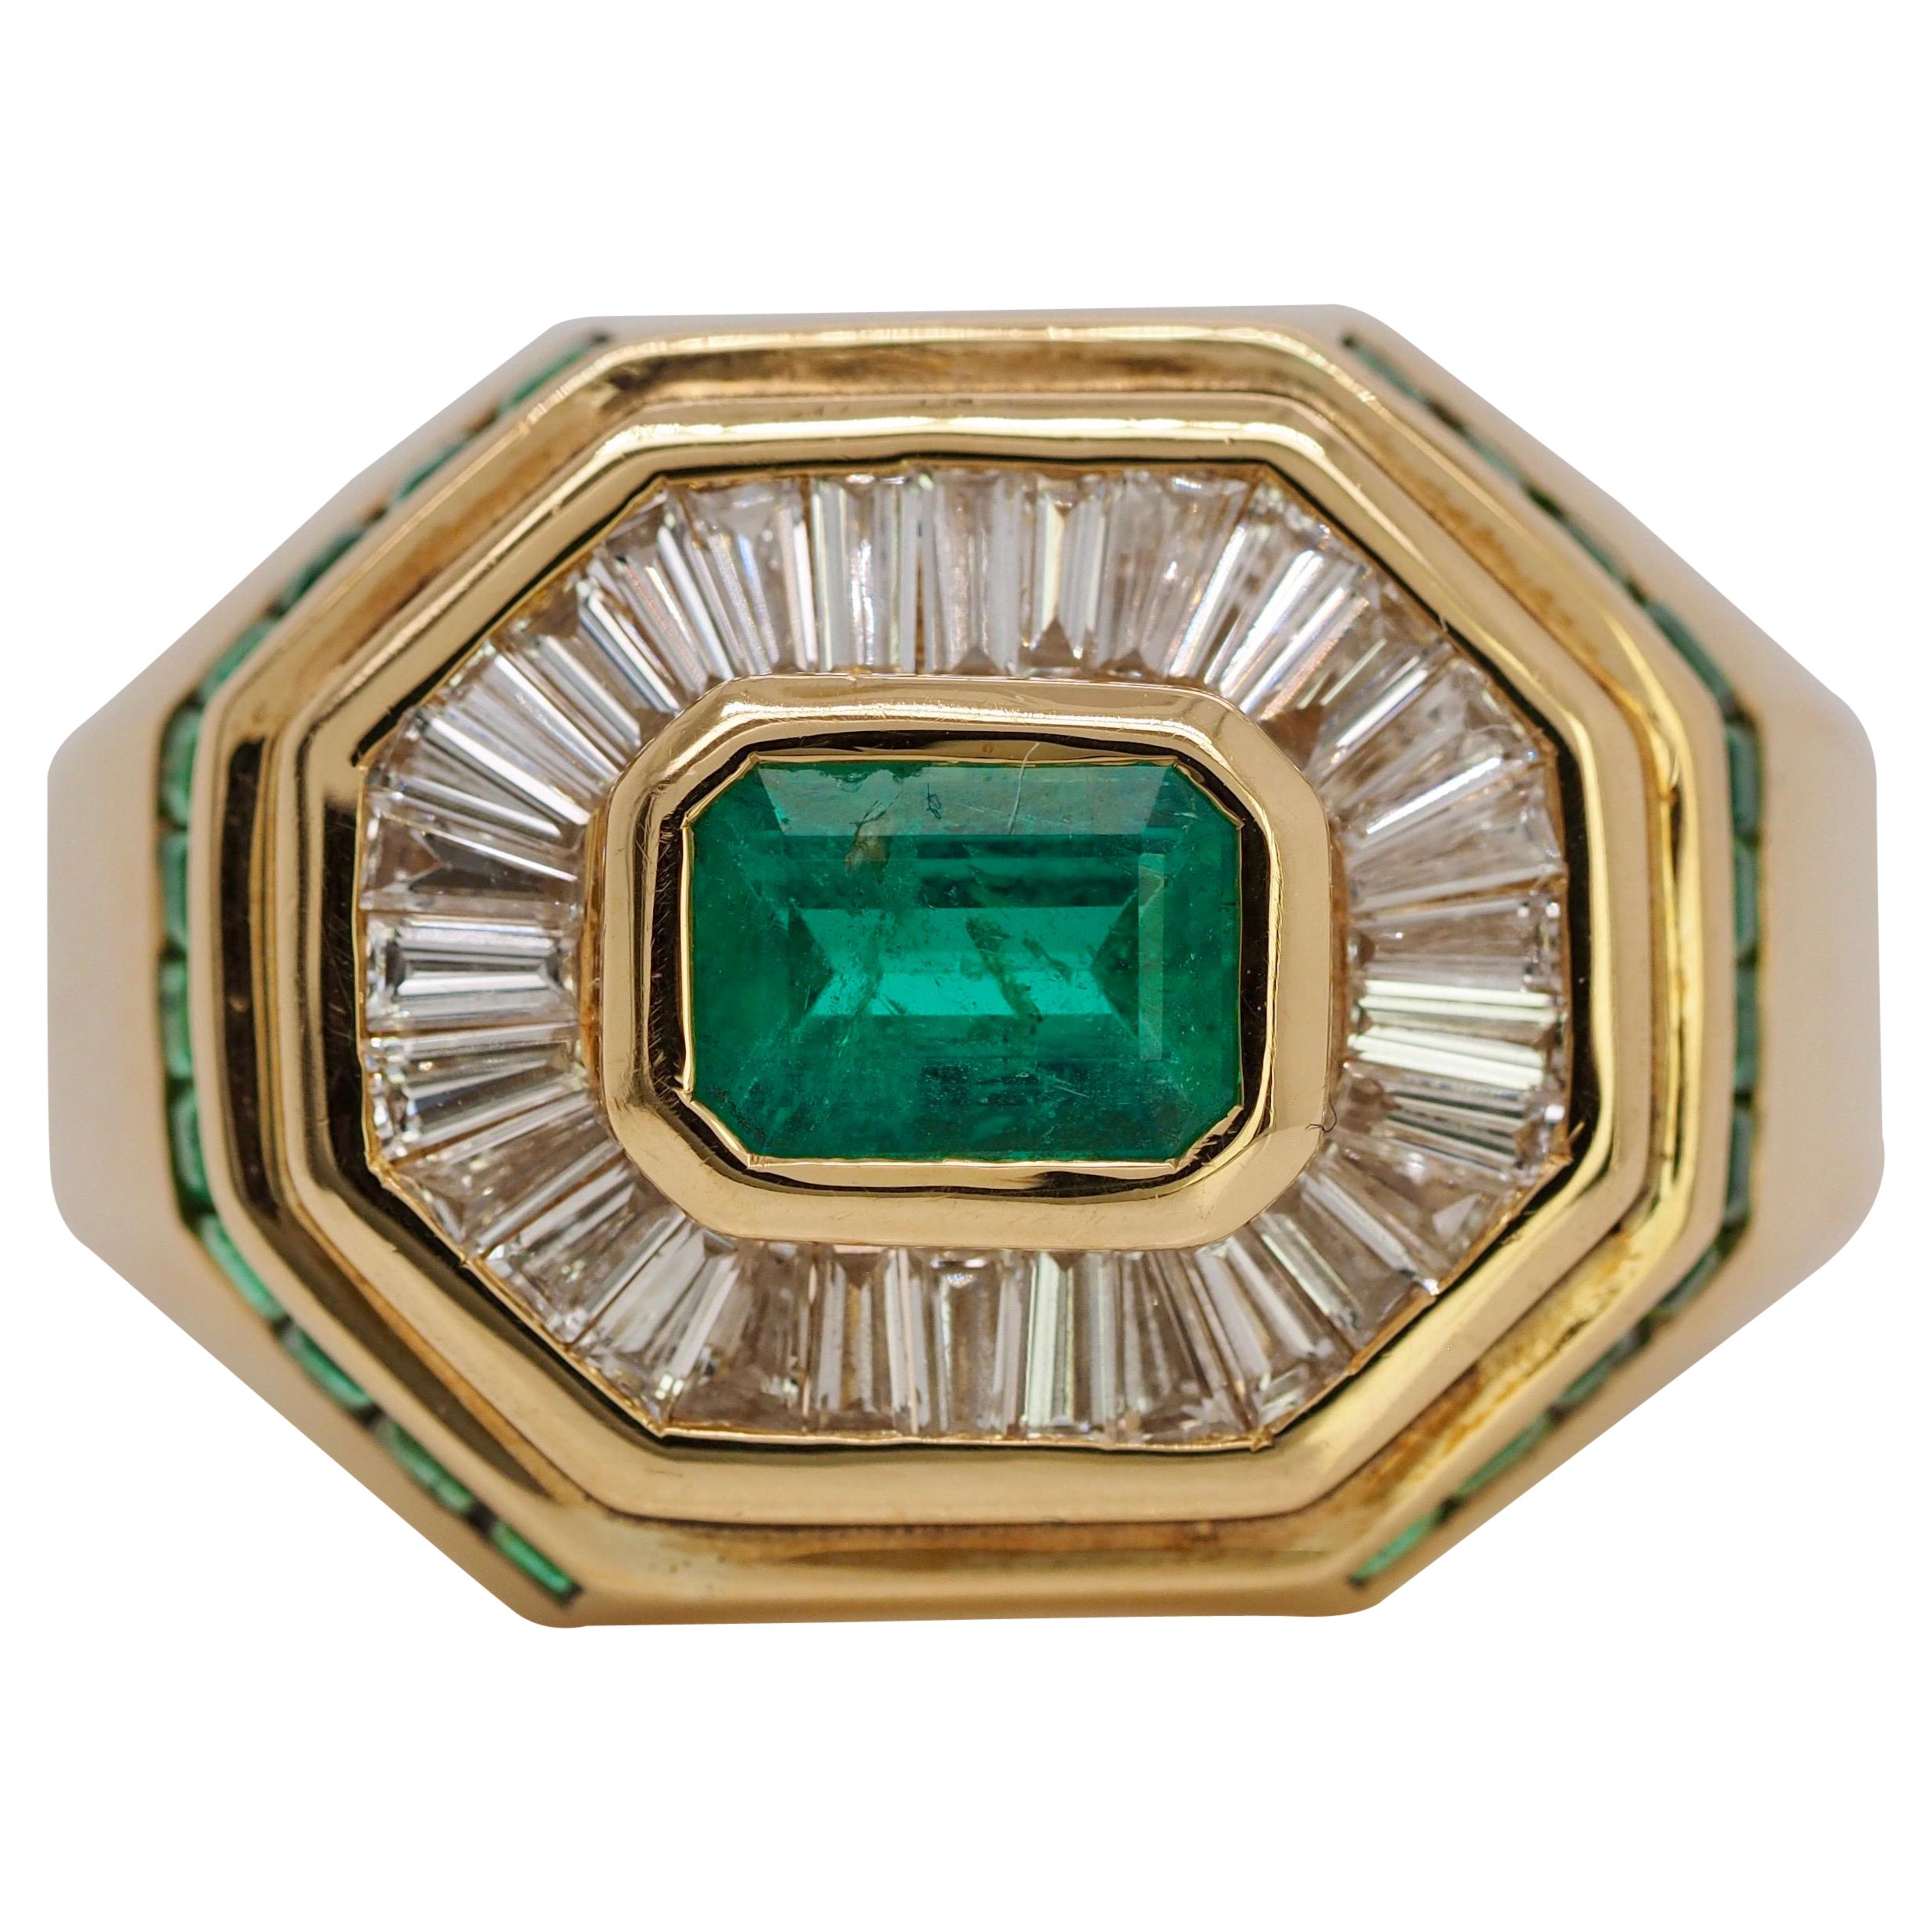 Circa 1990's Le Vian Ring Diamond and Emerald Ring
A true one of a kind piece that makes the perfect statement. Its a great men's ring or a women's ring that can be sized to your finger prior to shipping at no additional charge. This ring had an